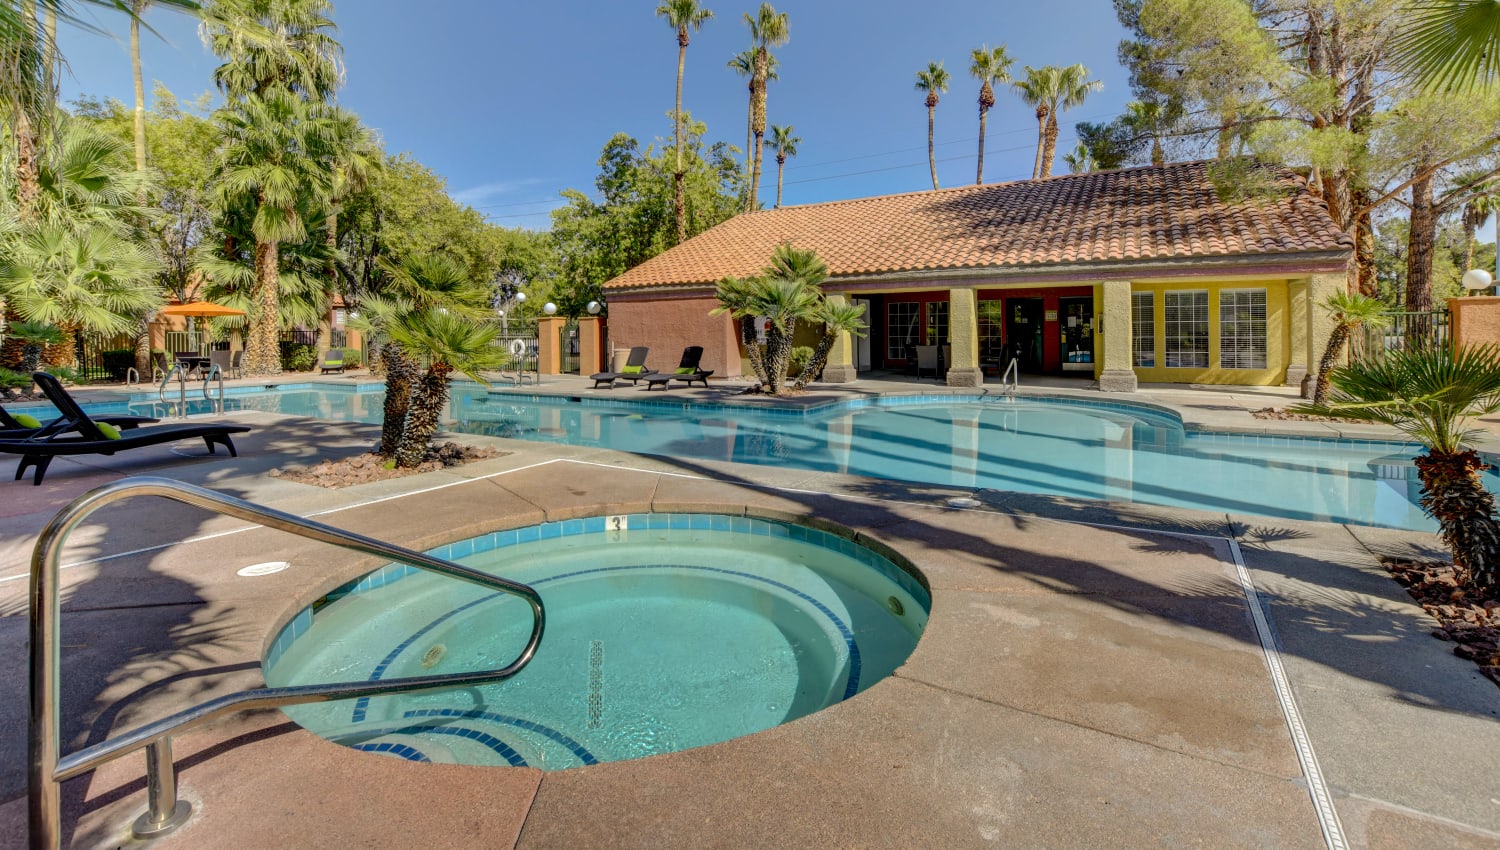 Sparkling pool and spa at Invitational Apartments in Henderson, Nevada